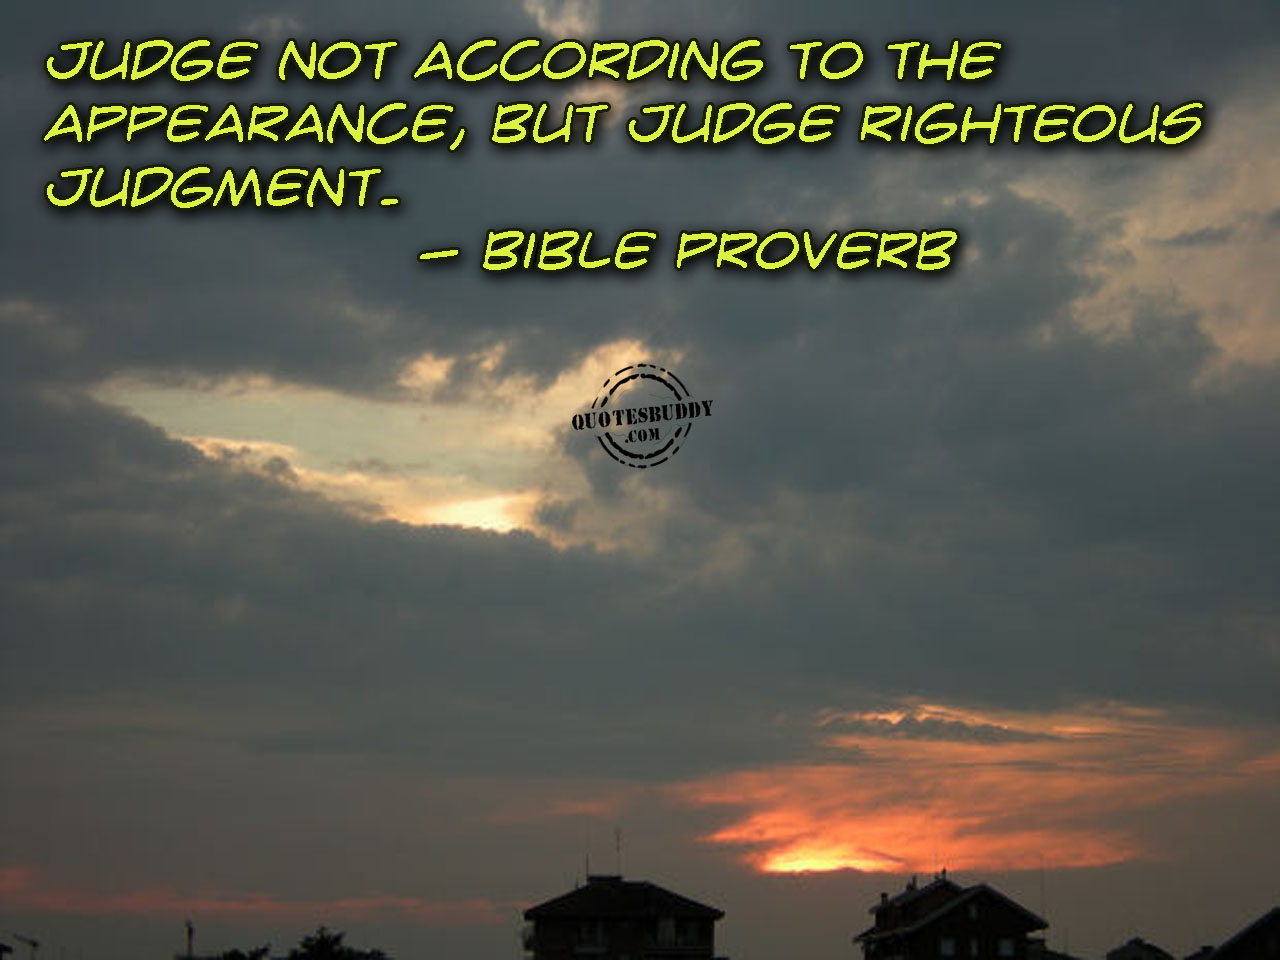 Judge not according to the appearance, but judge righteous judgment. Bible Proverb